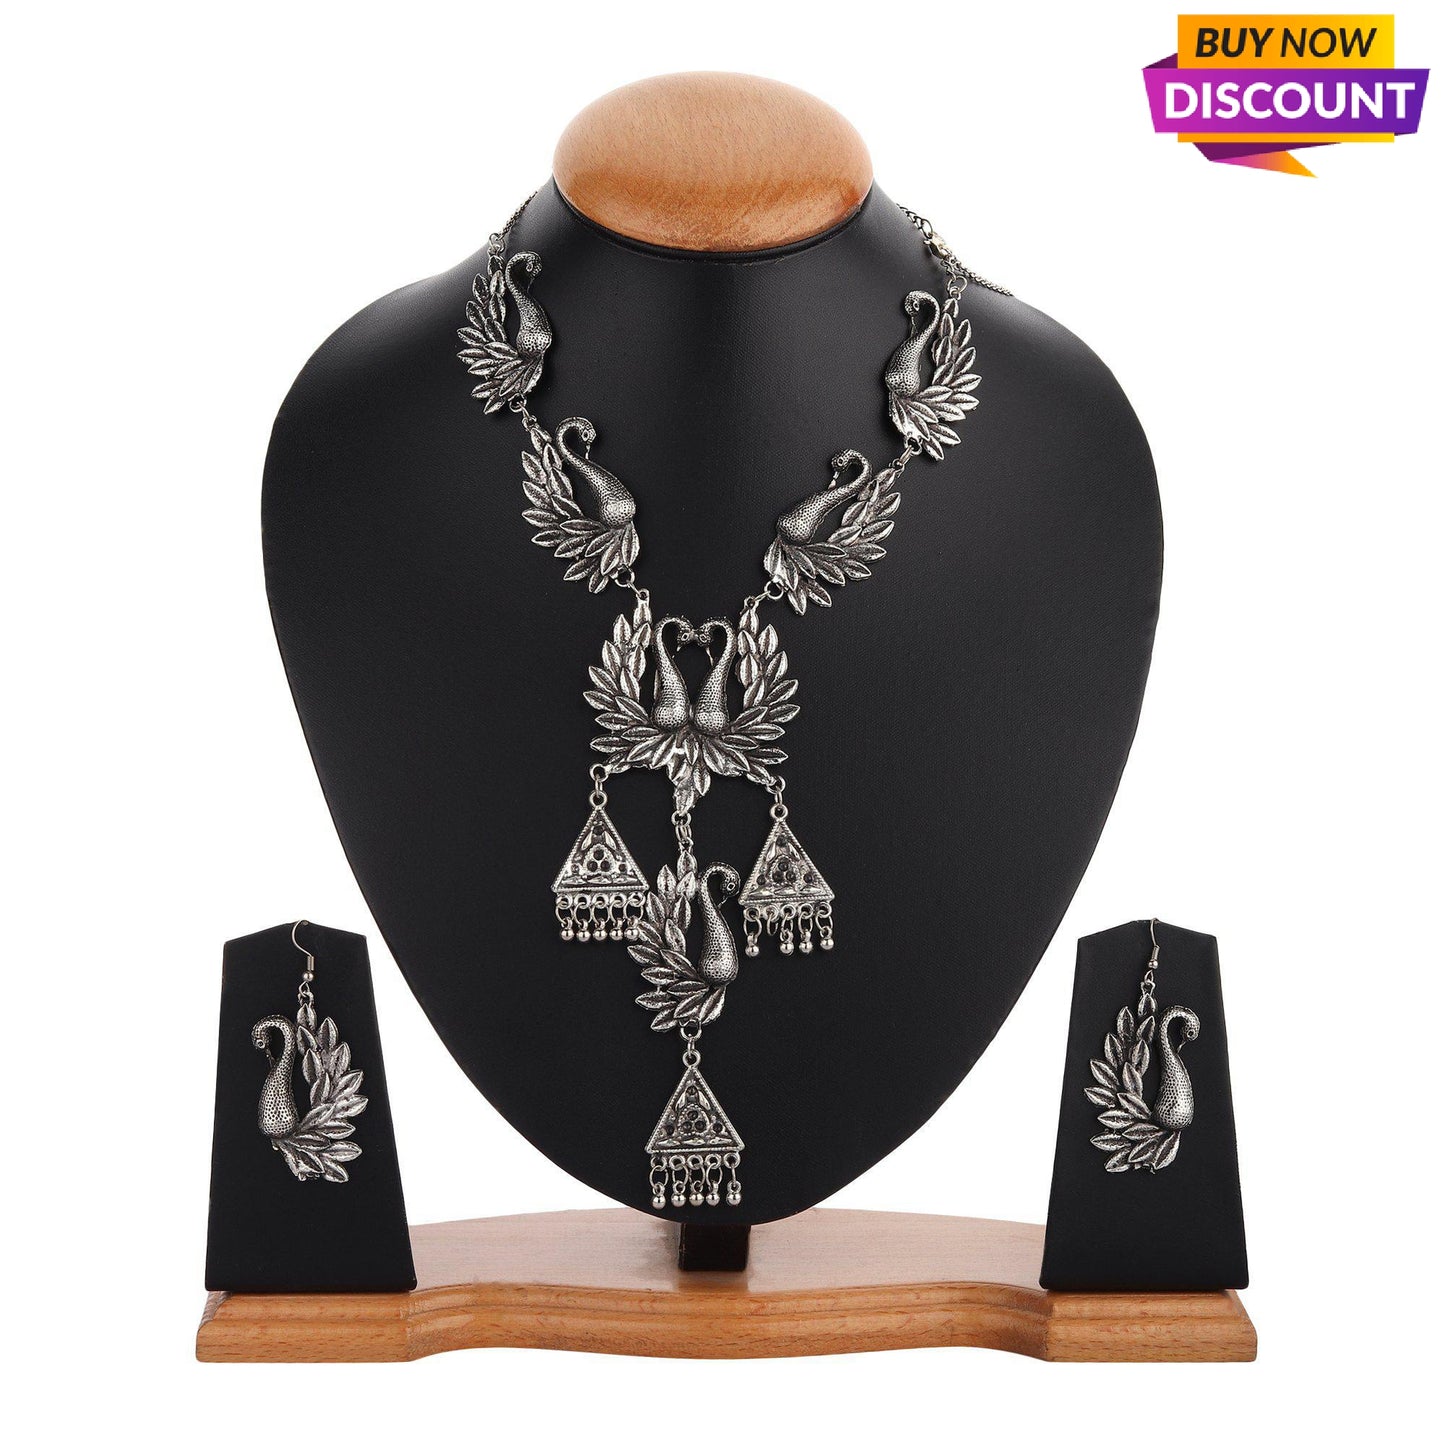 Fanning Peacock Choker Necklace With Earrings-Necklace Set-ONESKYSHOP